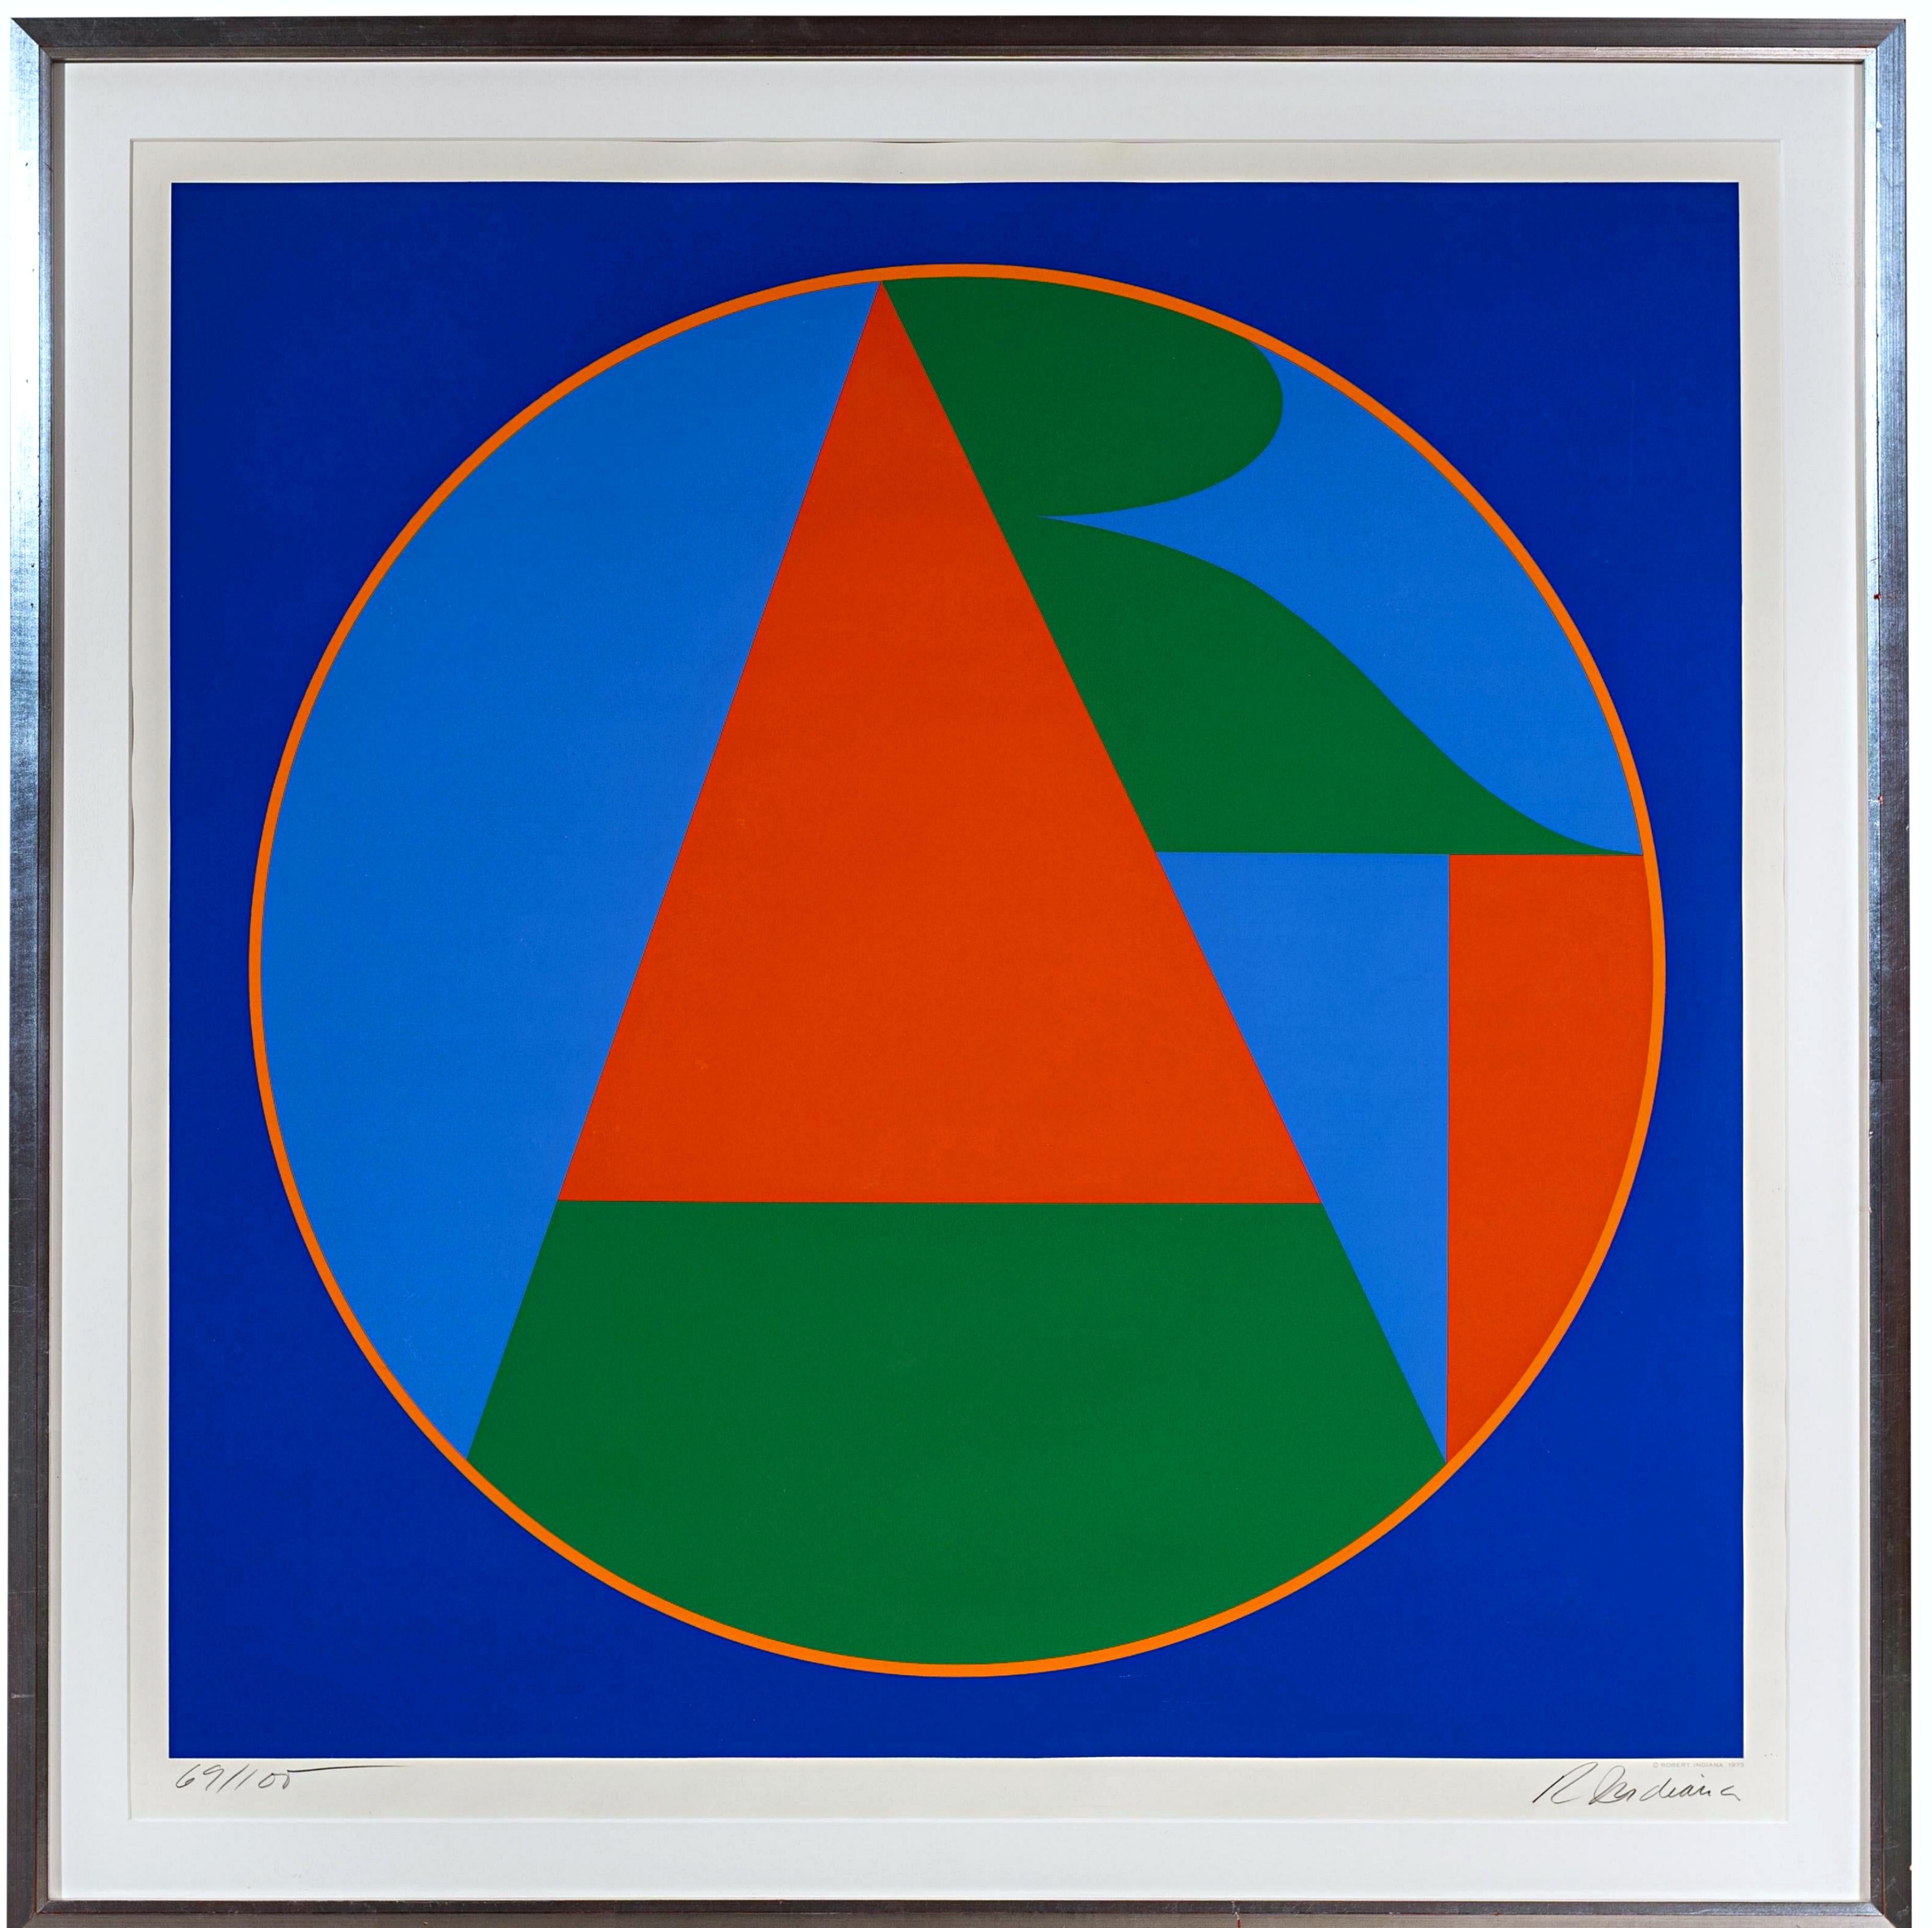 Robert Indiana Print - ART (Sheehan, 80) iconic 1970s geometric abstraction lt ed s/n for Colby College